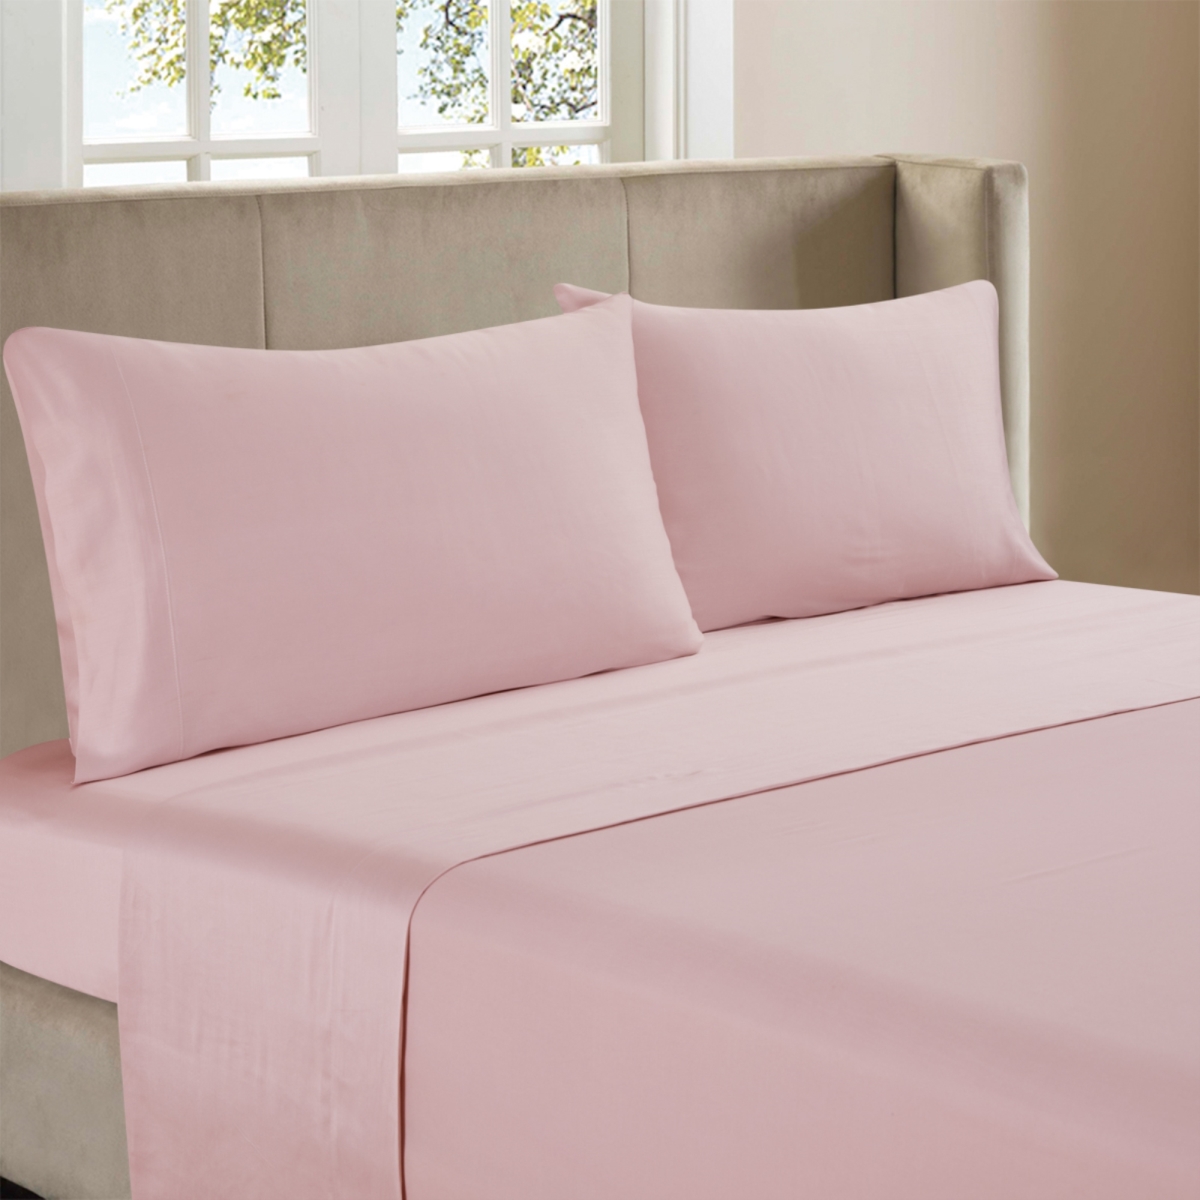 Whtx603-bhq Bamboo Sheet Set, Solid Blush - Queen Size - 4 Piece